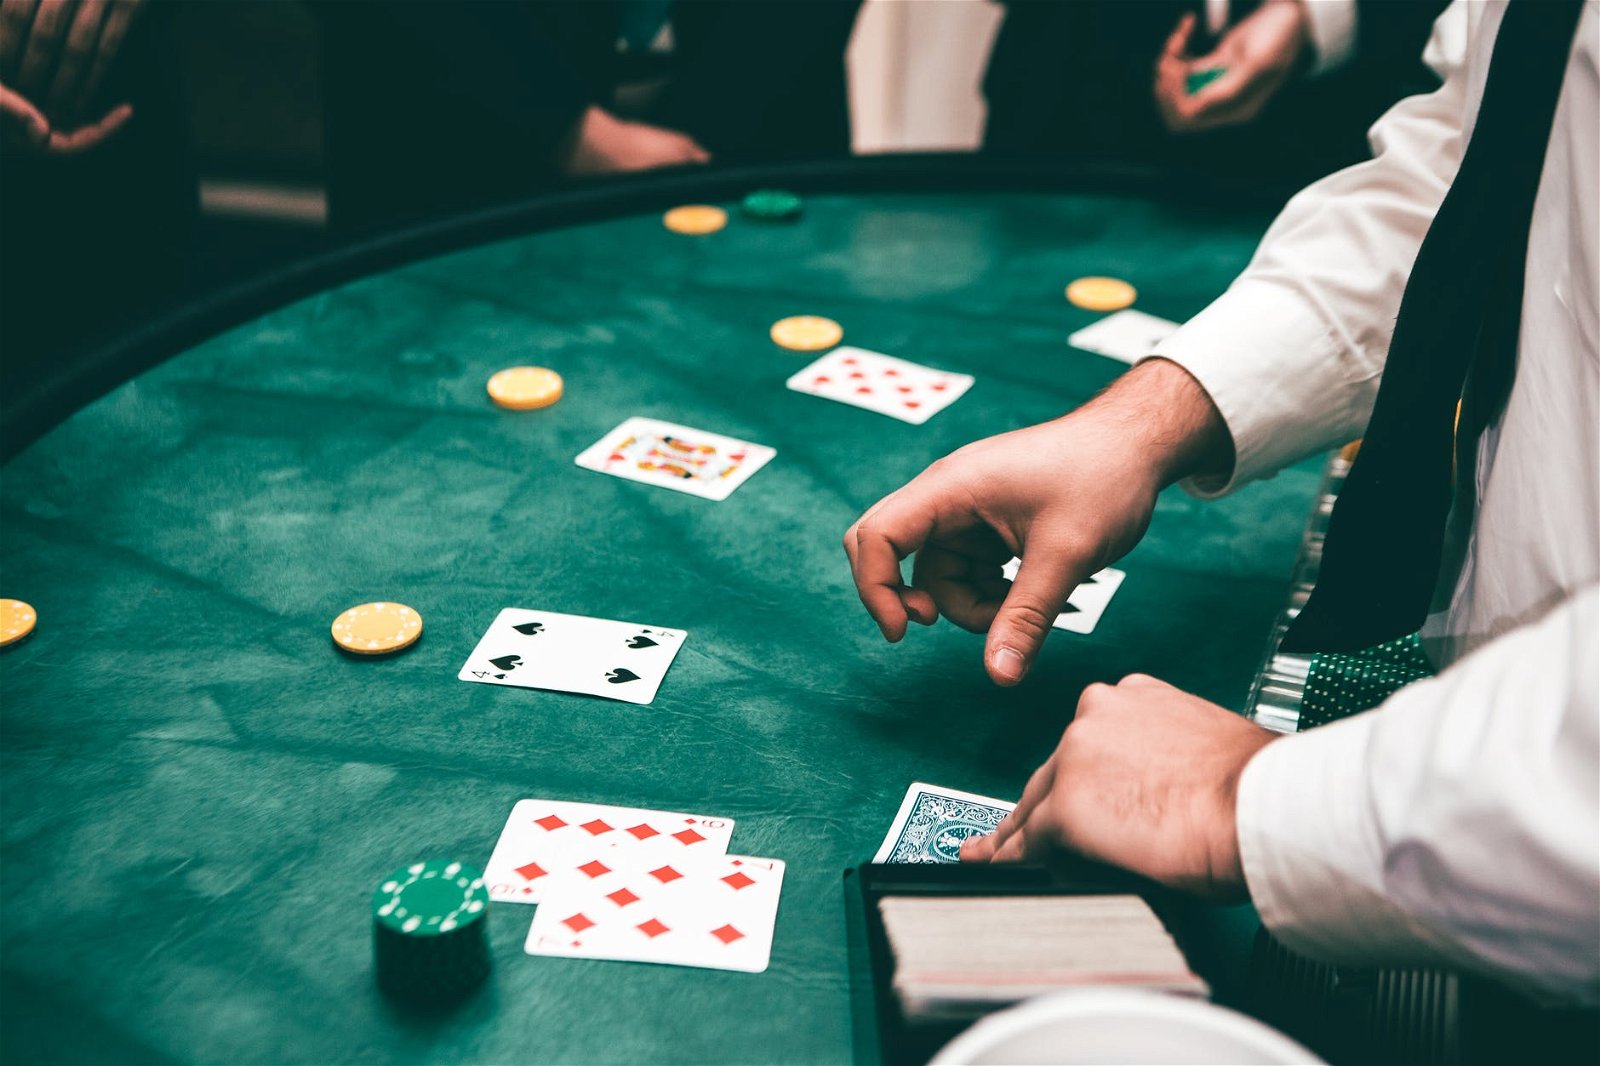 7 Business skills that Poker can teach you